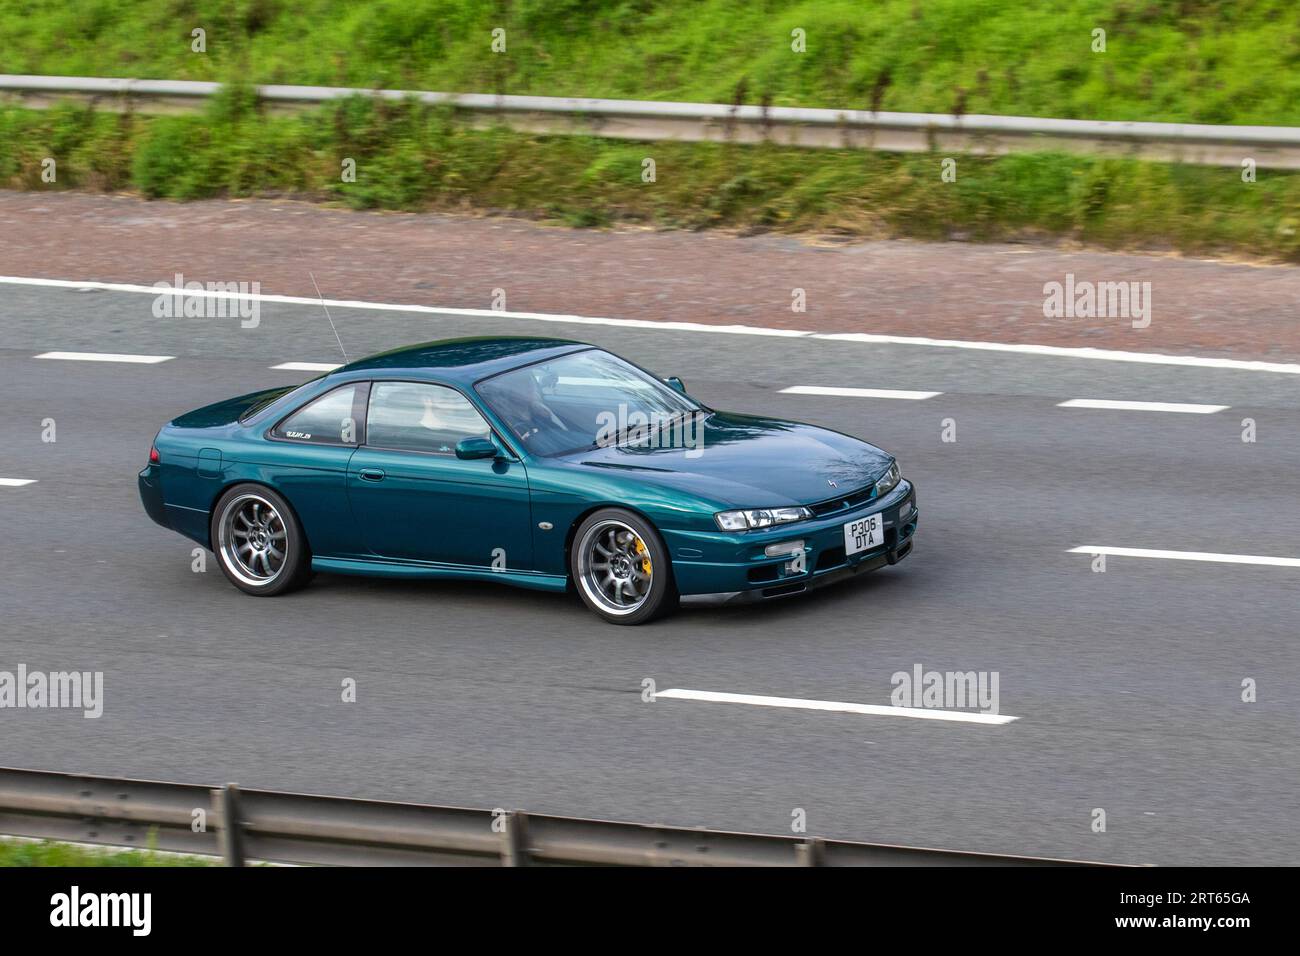 1997 90s nineties Green Nissan 200 SX  two-door coupe; travelling at speed on the M6 motorway in Greater Manchester, UK Stock Photo